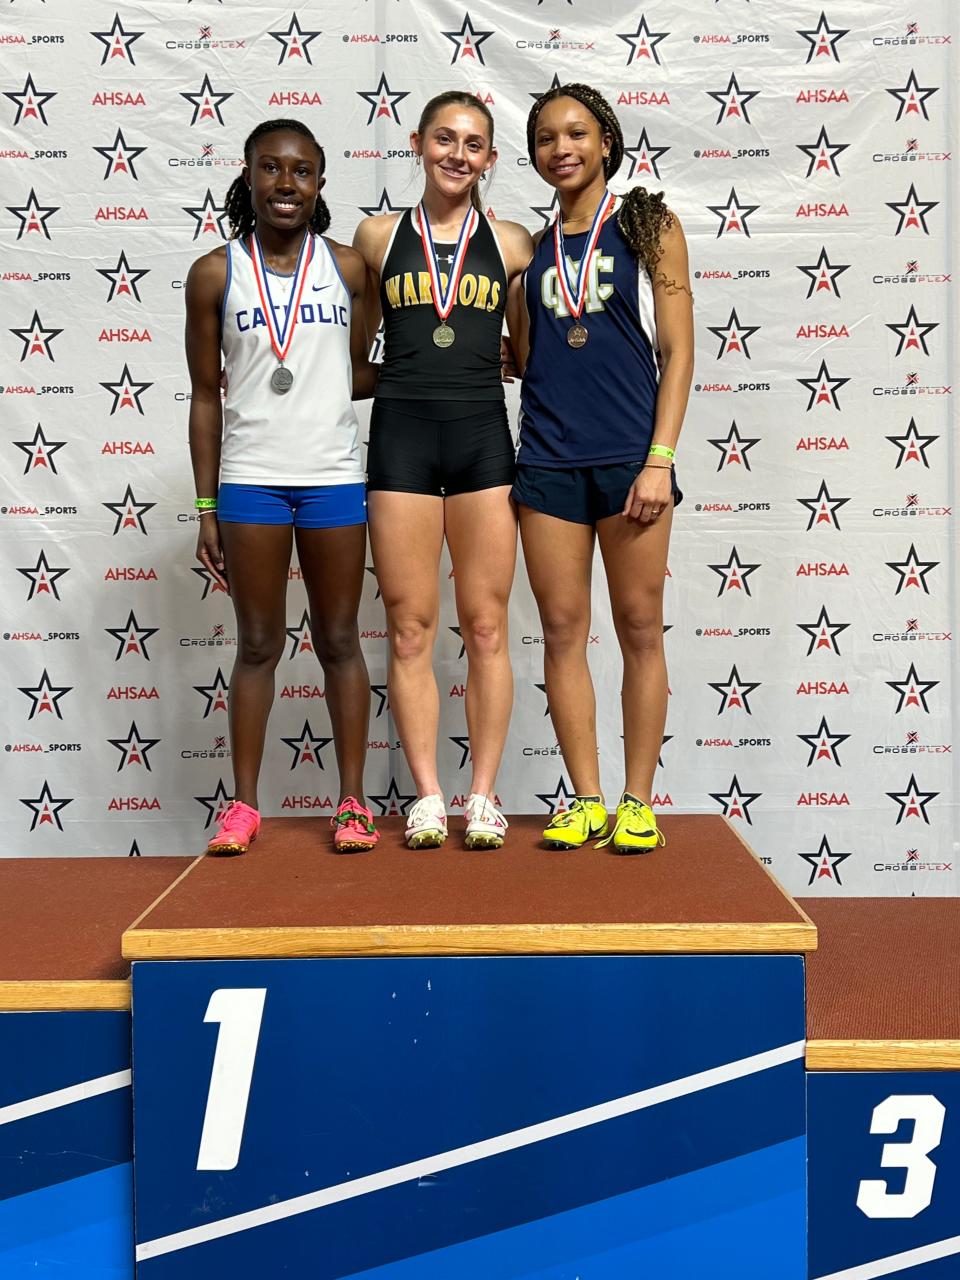 Cherokee County's Mary Hayes Johnson poses on the podium, after winning two state titles at the AHSAA indoor track meet.